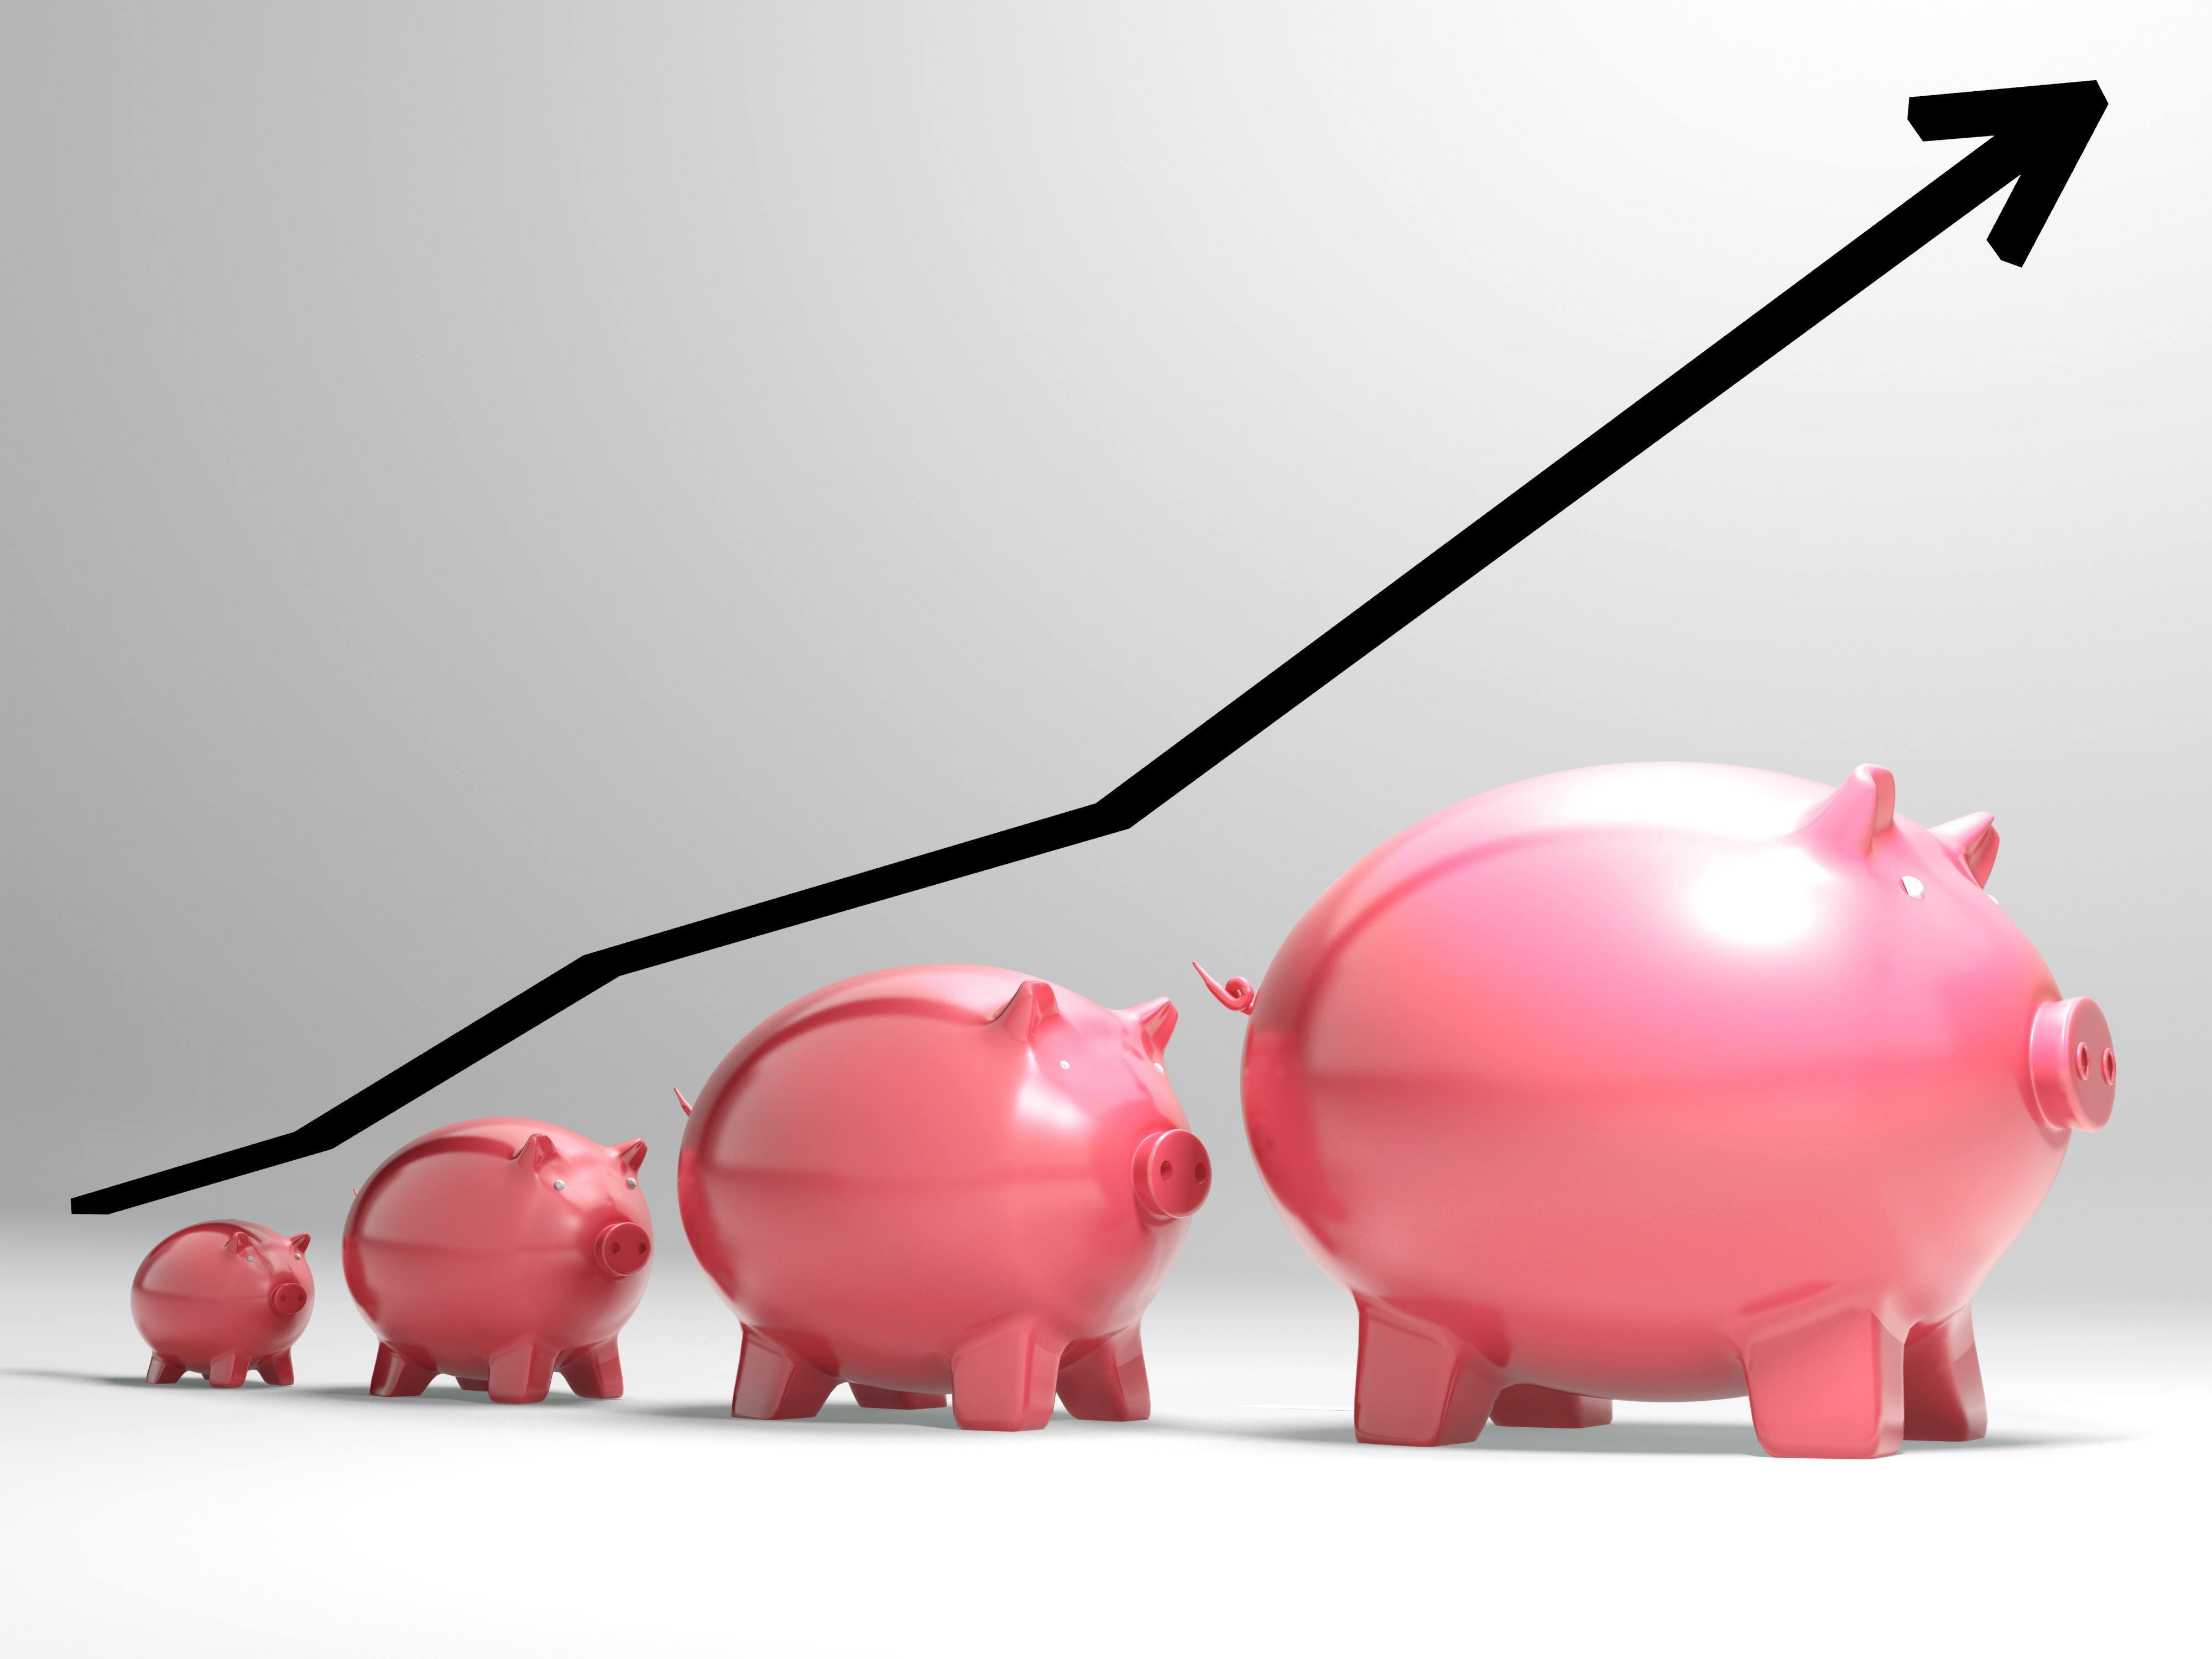 Growing Piggy Shows Financial Growth in greenvilole south carolina and cliffs communities